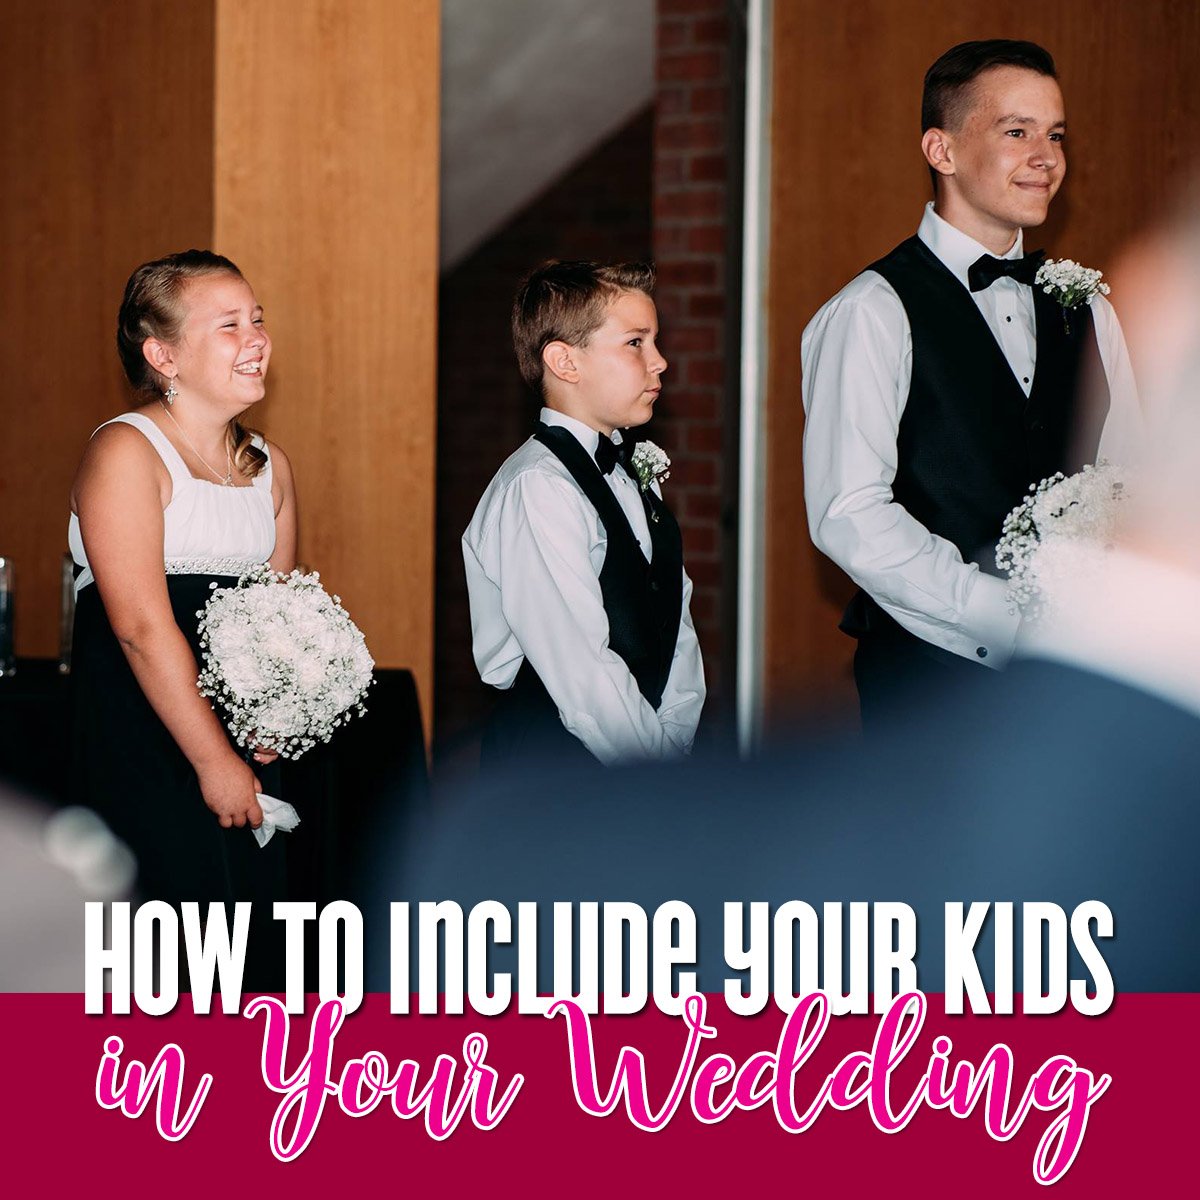 How to Involve Kids in Your Wedding Day